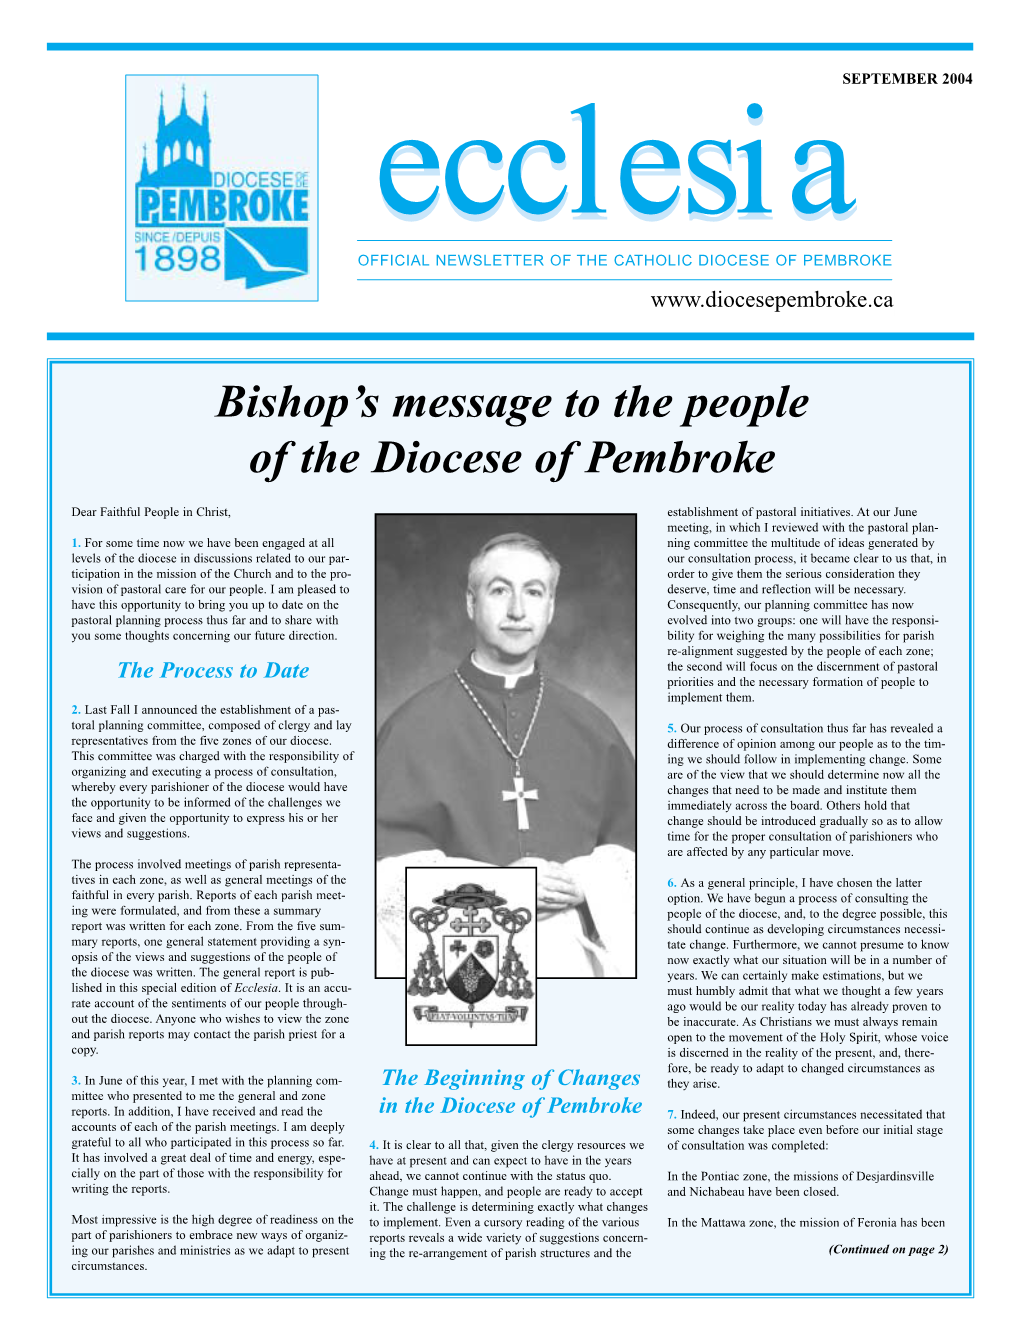 SEPTEMBER 2004 Ecclesia OFFICIAL NEWSLETTER of the CATHOLIC DIOCESE of PEMBROKE